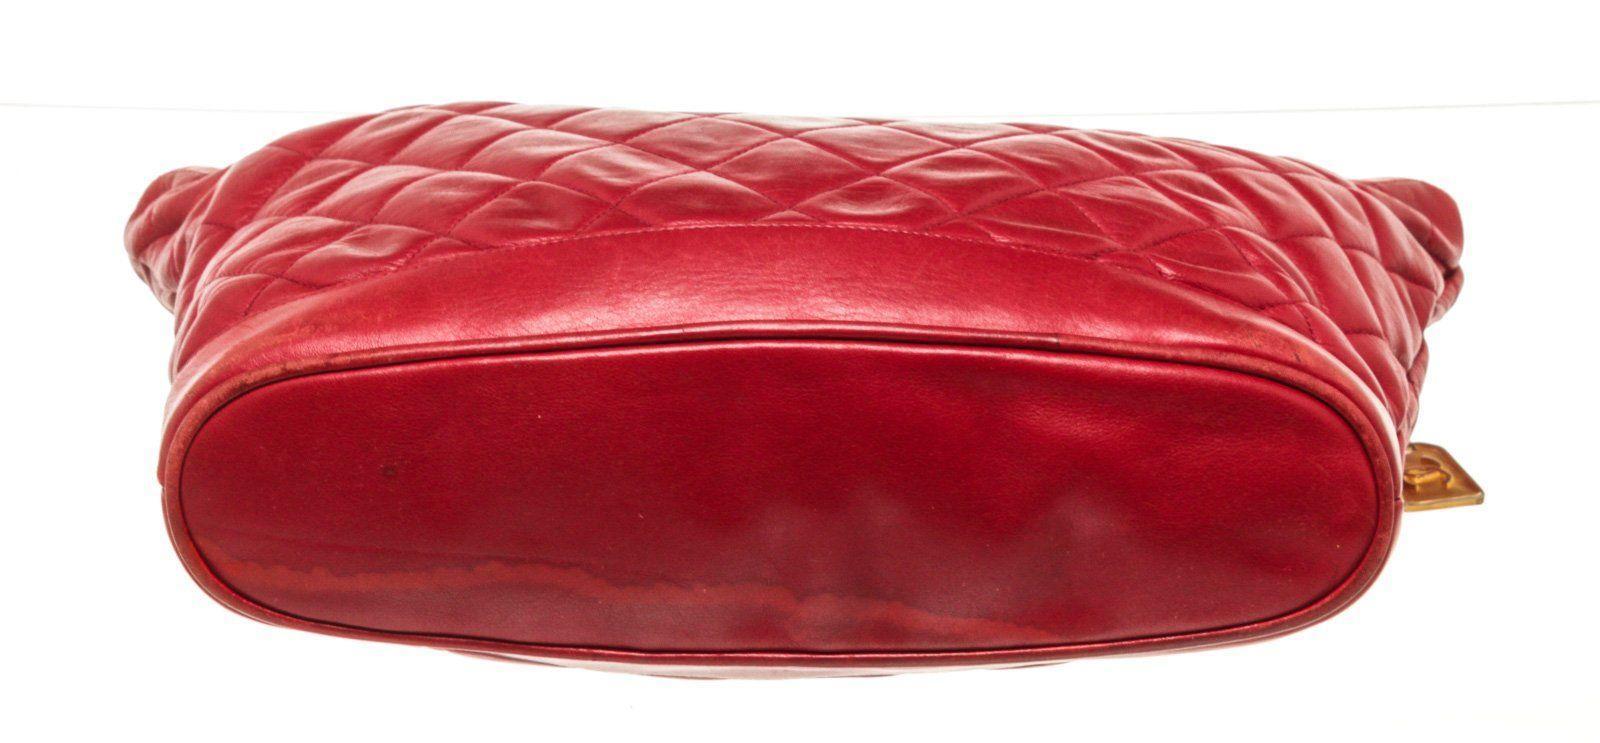 Chanel Red Leather Quilted Chain Shoulder Bag